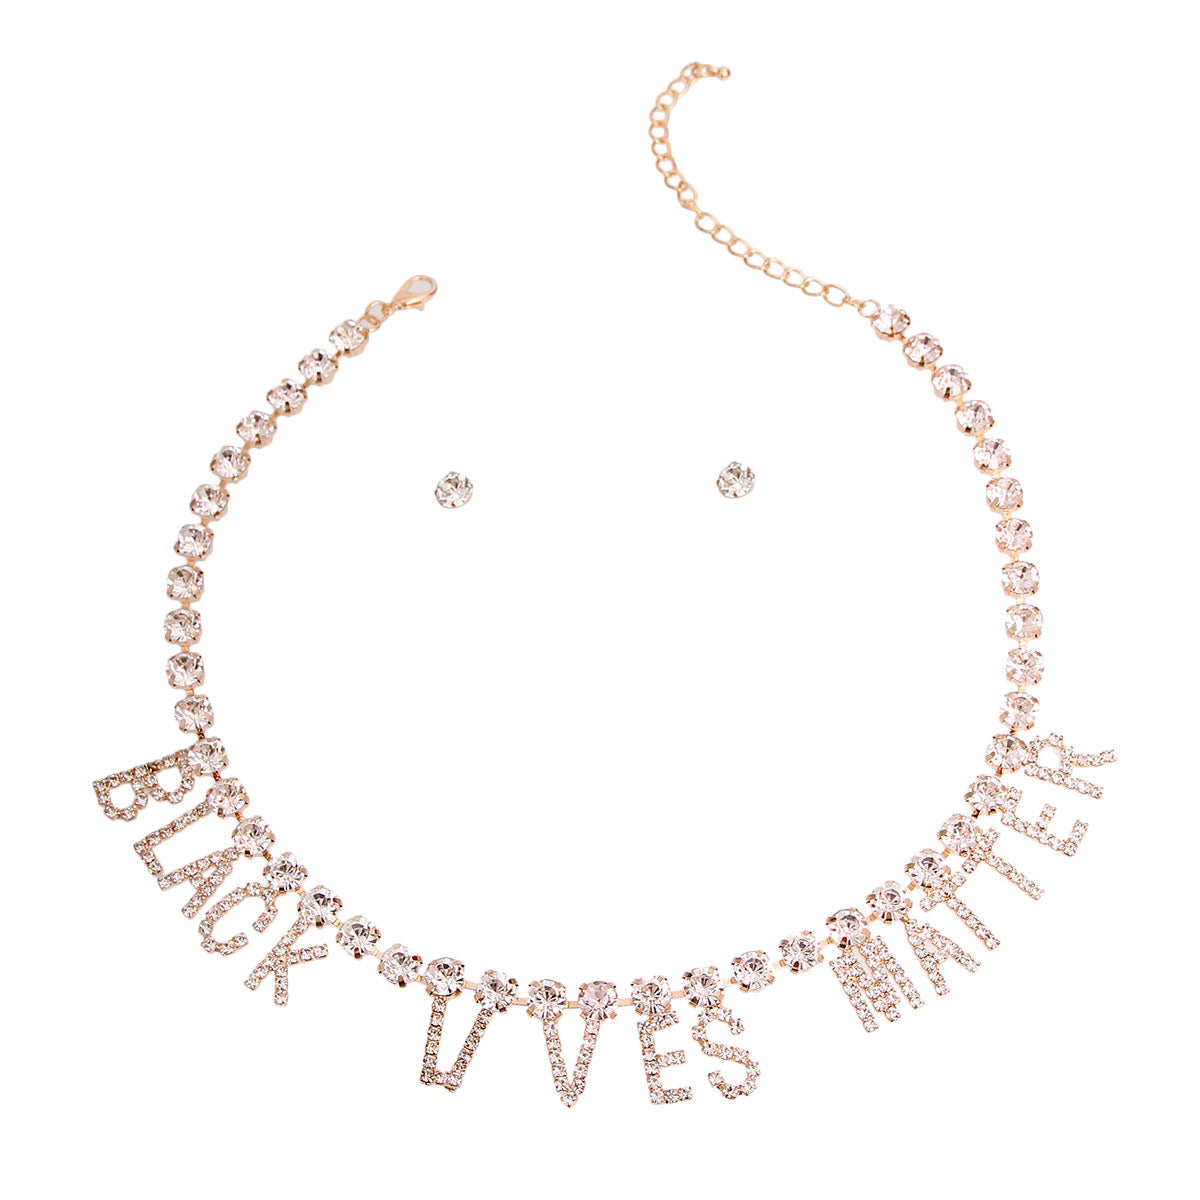 Powerful Black Lives Matter necklace